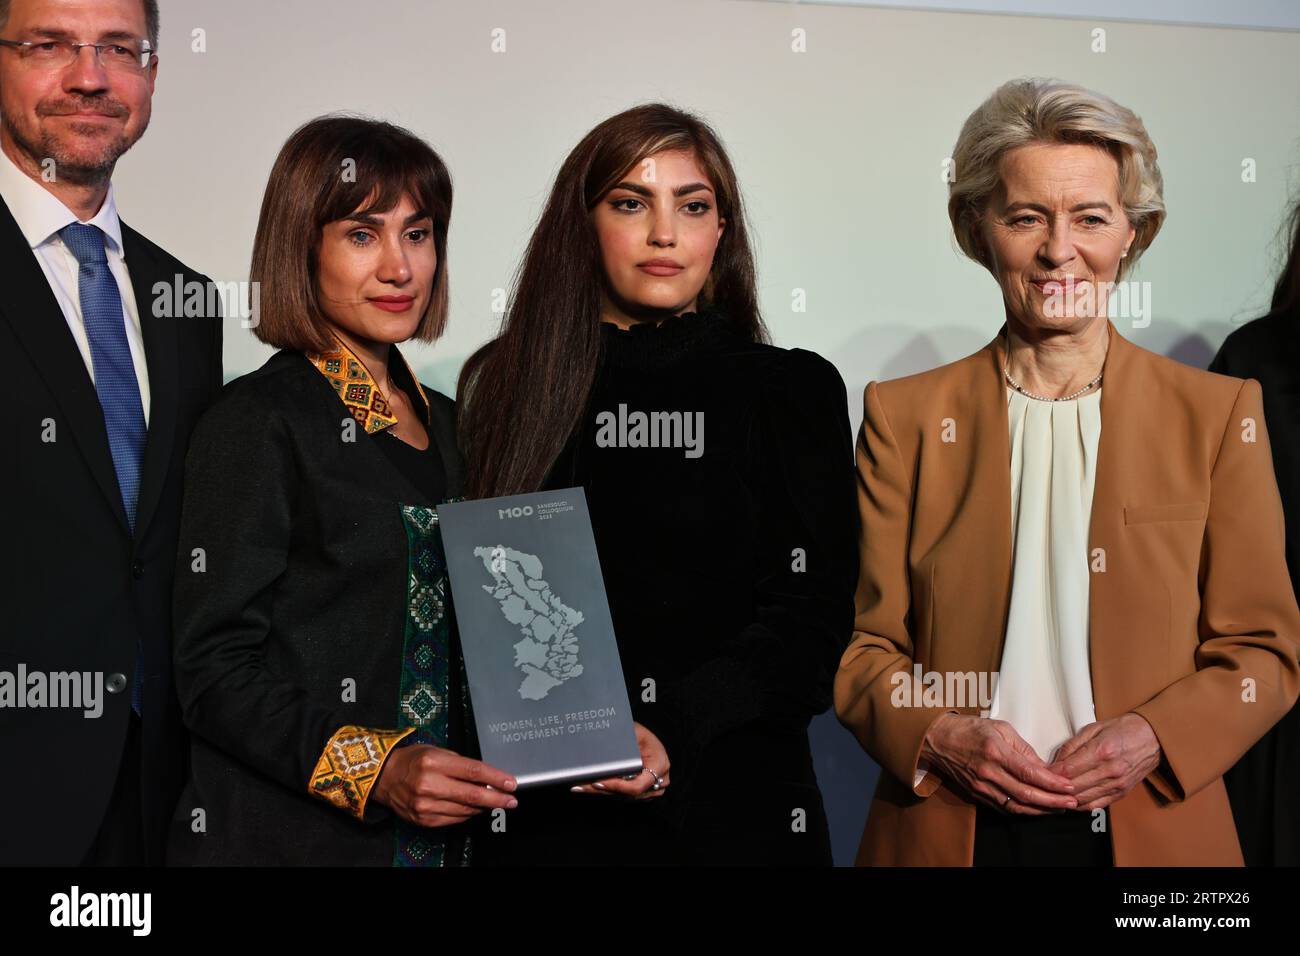 Potsdam, Germany, September 14, 2023, (l-r) Mike Schubert, Mersedeh Shahinkar, Shima Babaei, Ursula von der Leyen, on stage from the M100 Media Award to the Iranian “Women, Life, Freedom” movement in the Orangerie in Park Sanssouci. Sven Struck/Alamy Live News Stock Photo